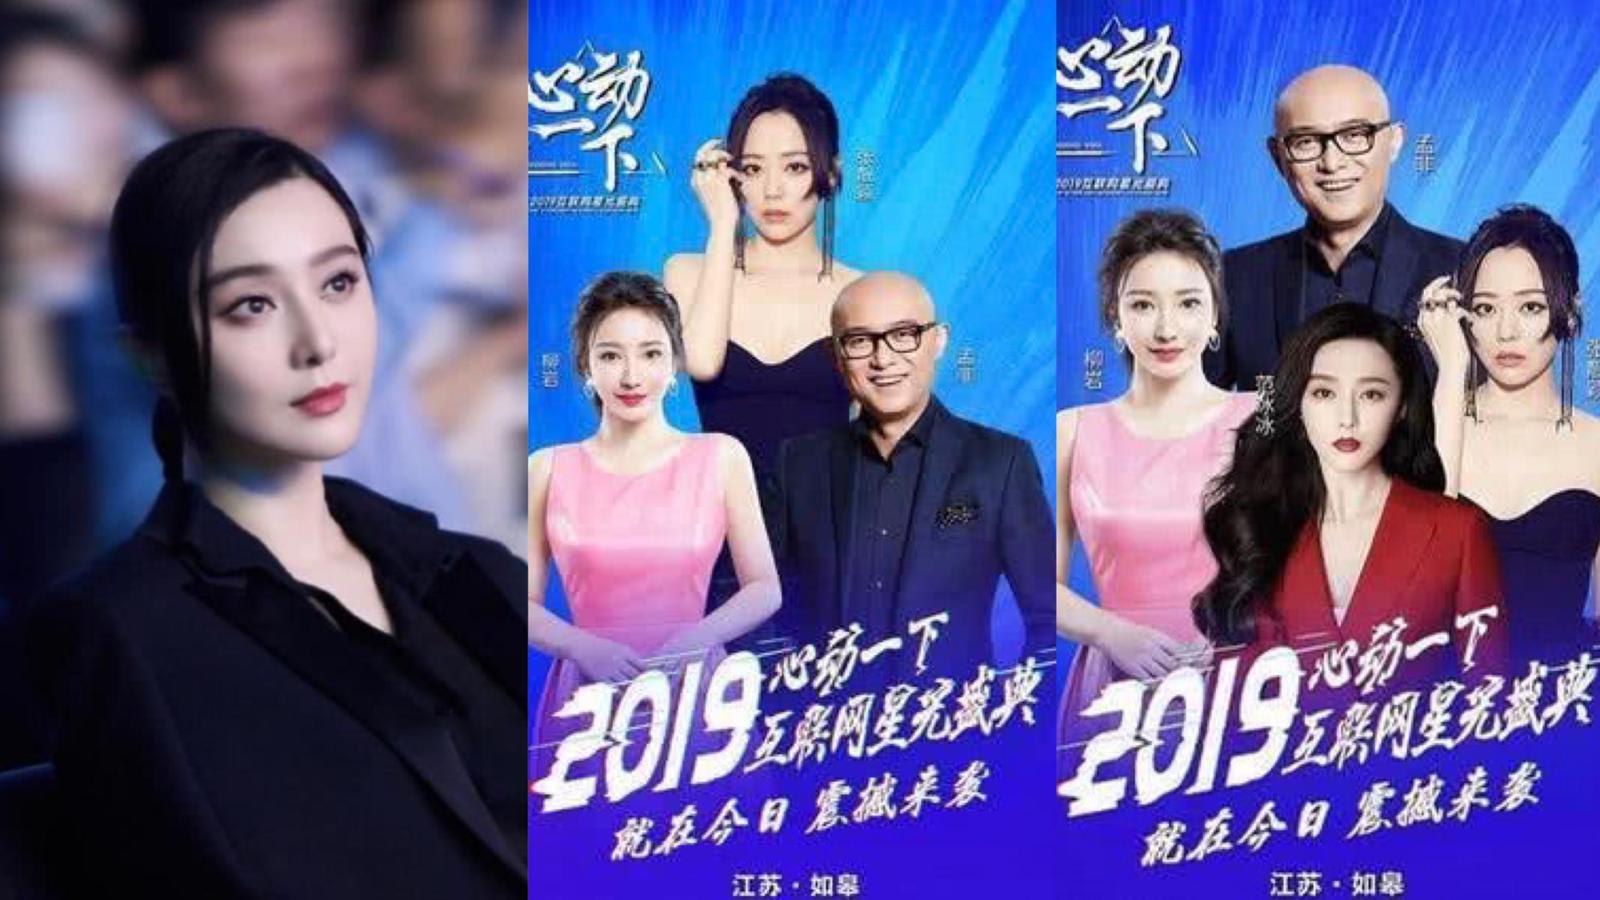 Fan Bingbing Got Removed From The Poster Of An Event She Was Headlining, Loses Front Row Status Too